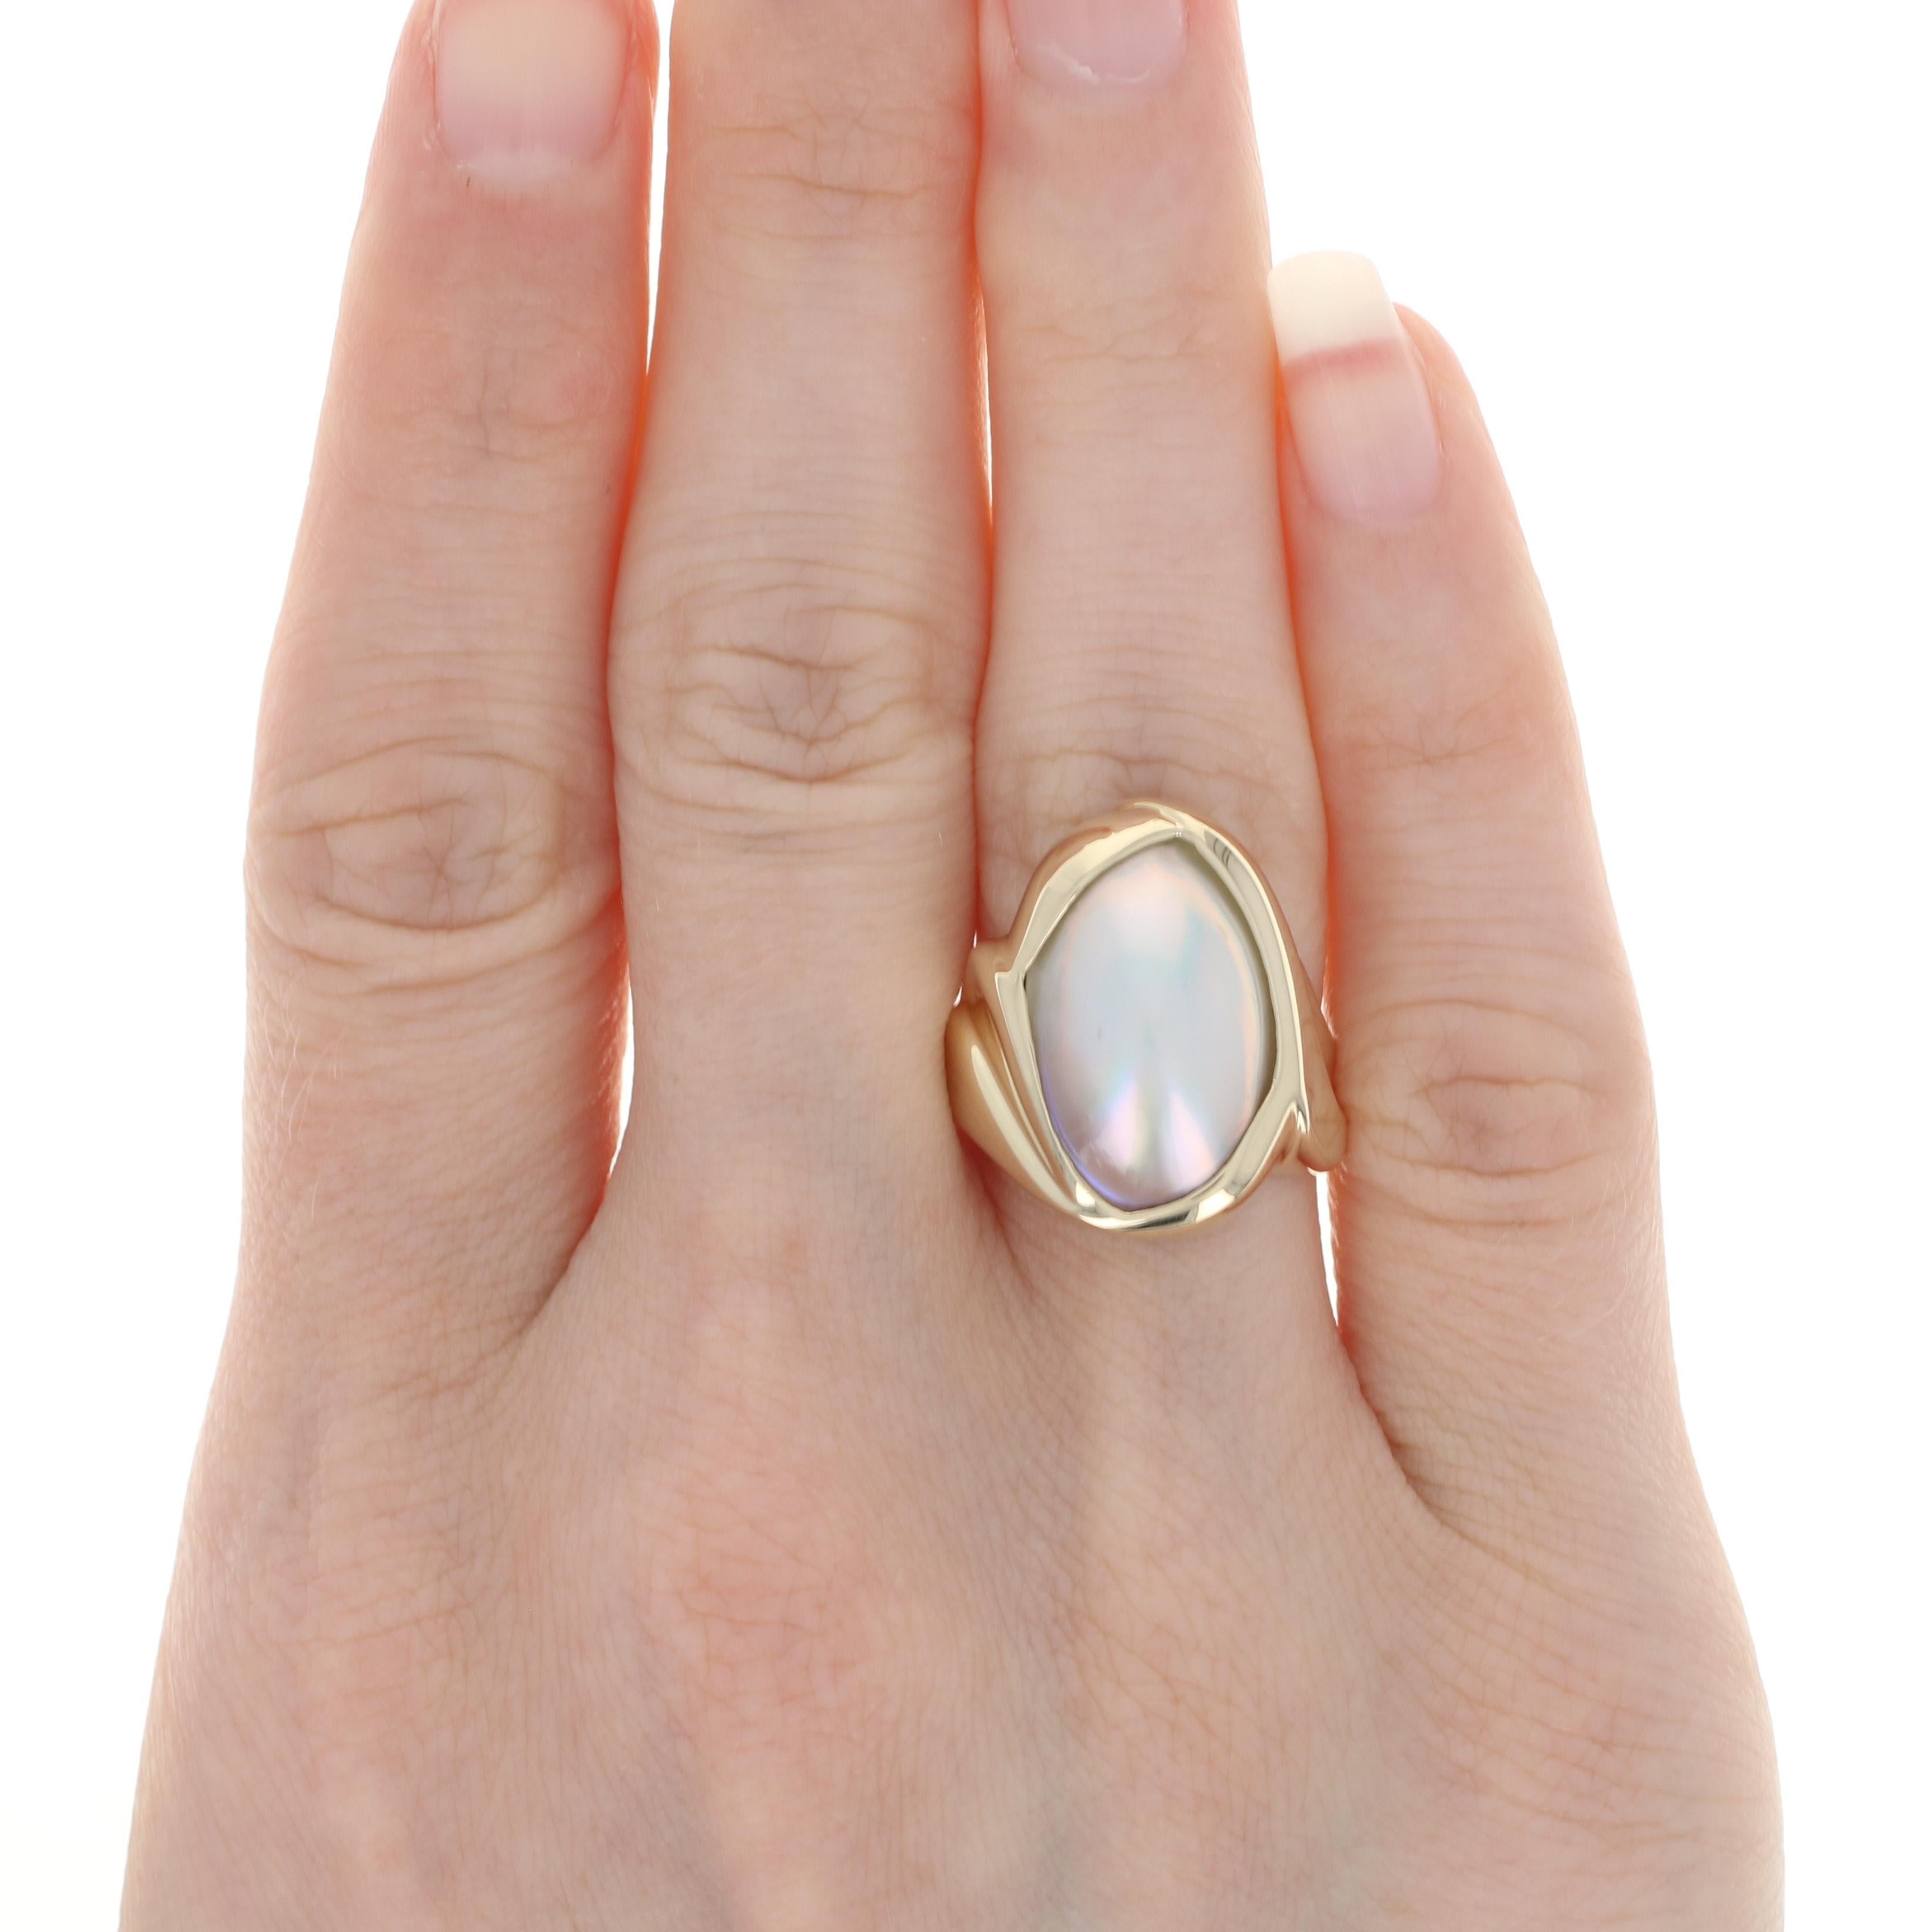 Size: 7 1/4
Sizing Fee: Can be sized up or down 1 size for $30

Metal Content: 14k Yellow Gold

Stone Information: 
Genuine Mabe Pearl

Style: Cocktail Solitaire / Bypass

Face Height (north to south): 27/32